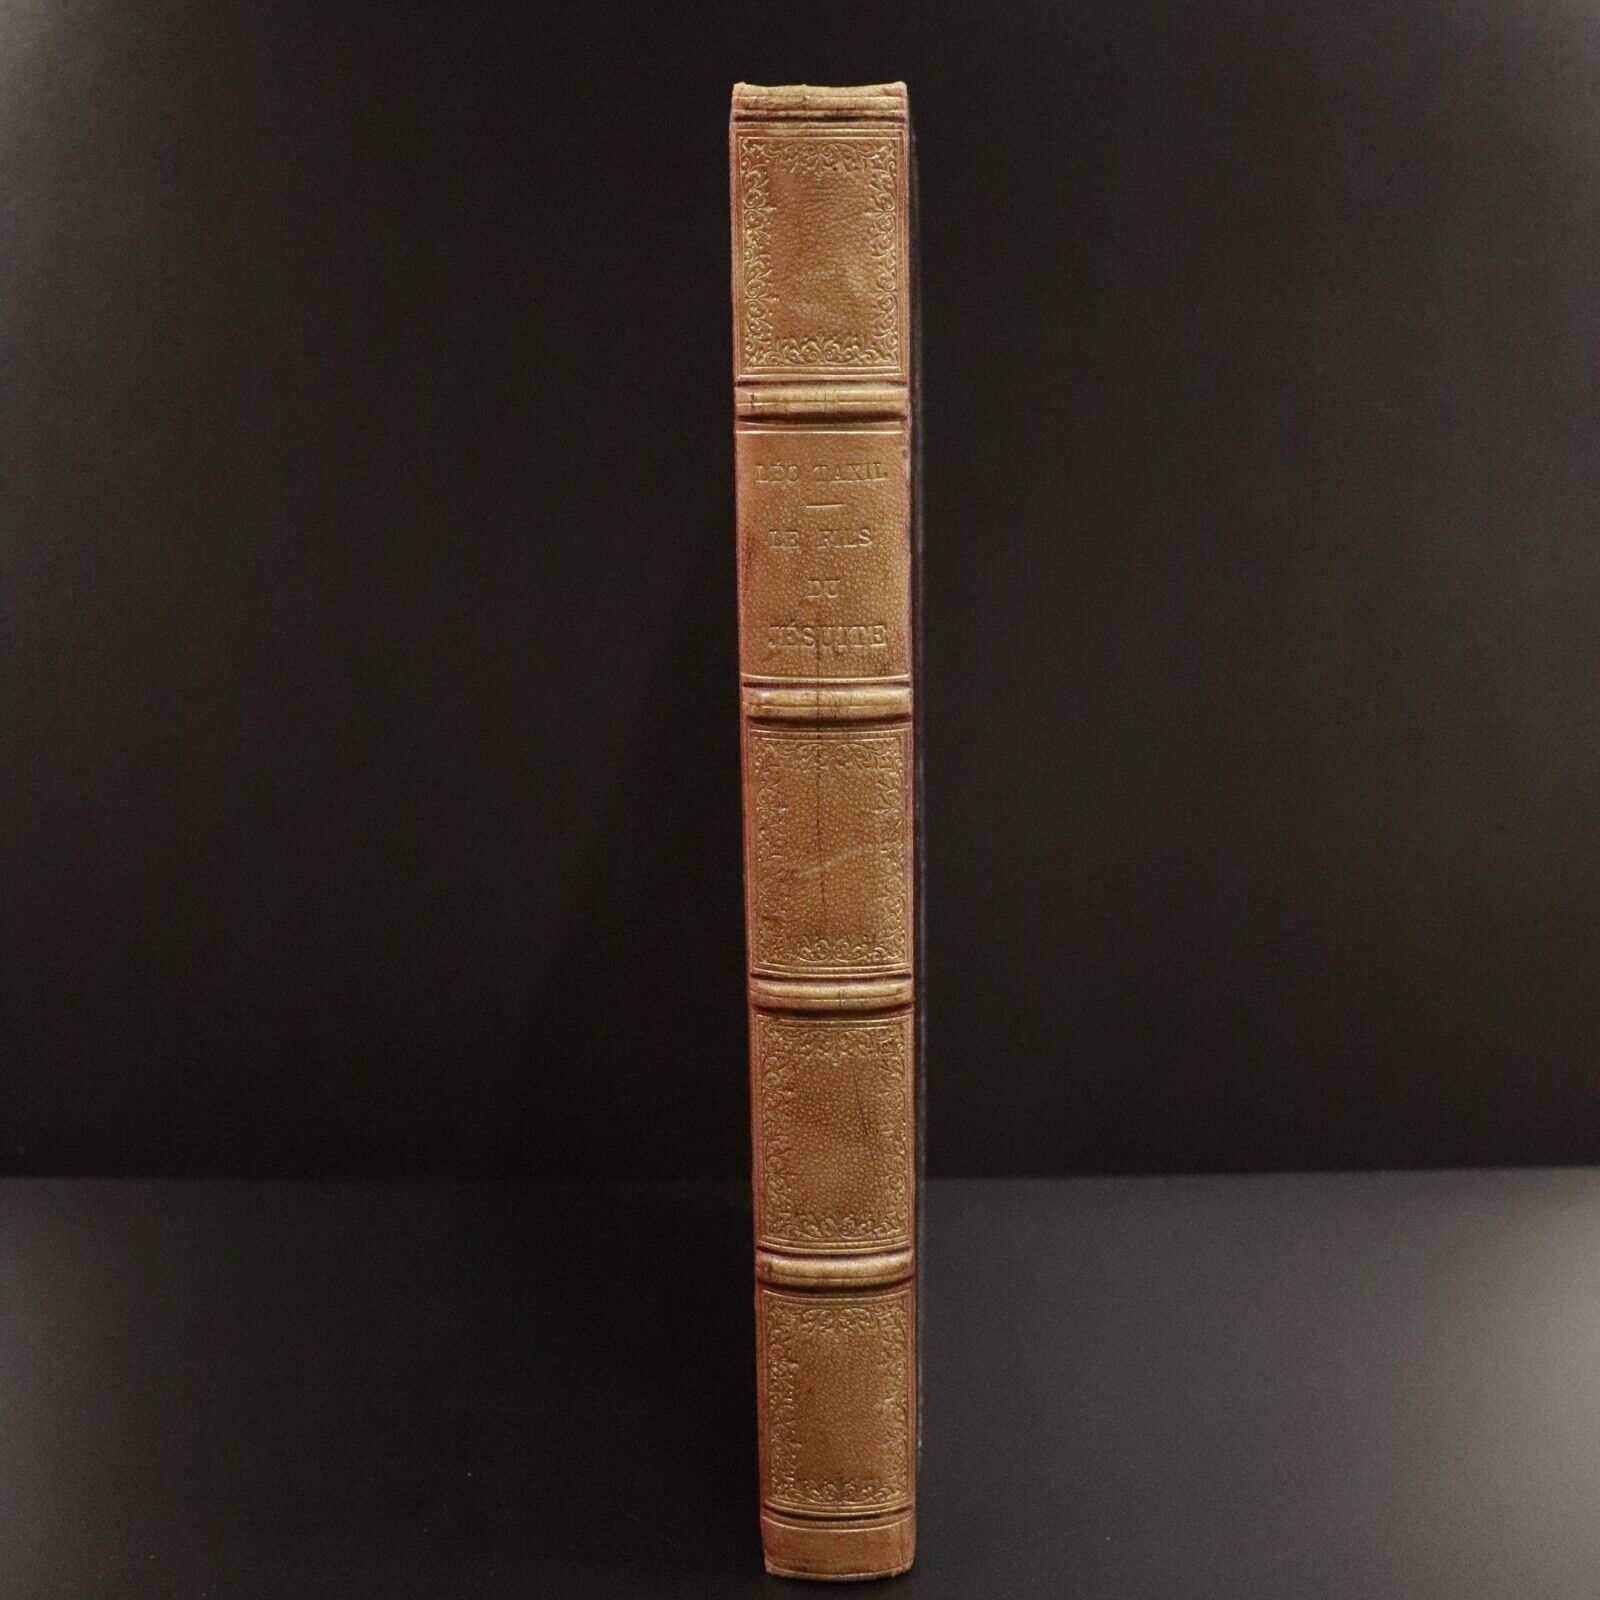 c1879 Le Fils Du Jesuite by Leo Taxil Antiquarian French Theology Book